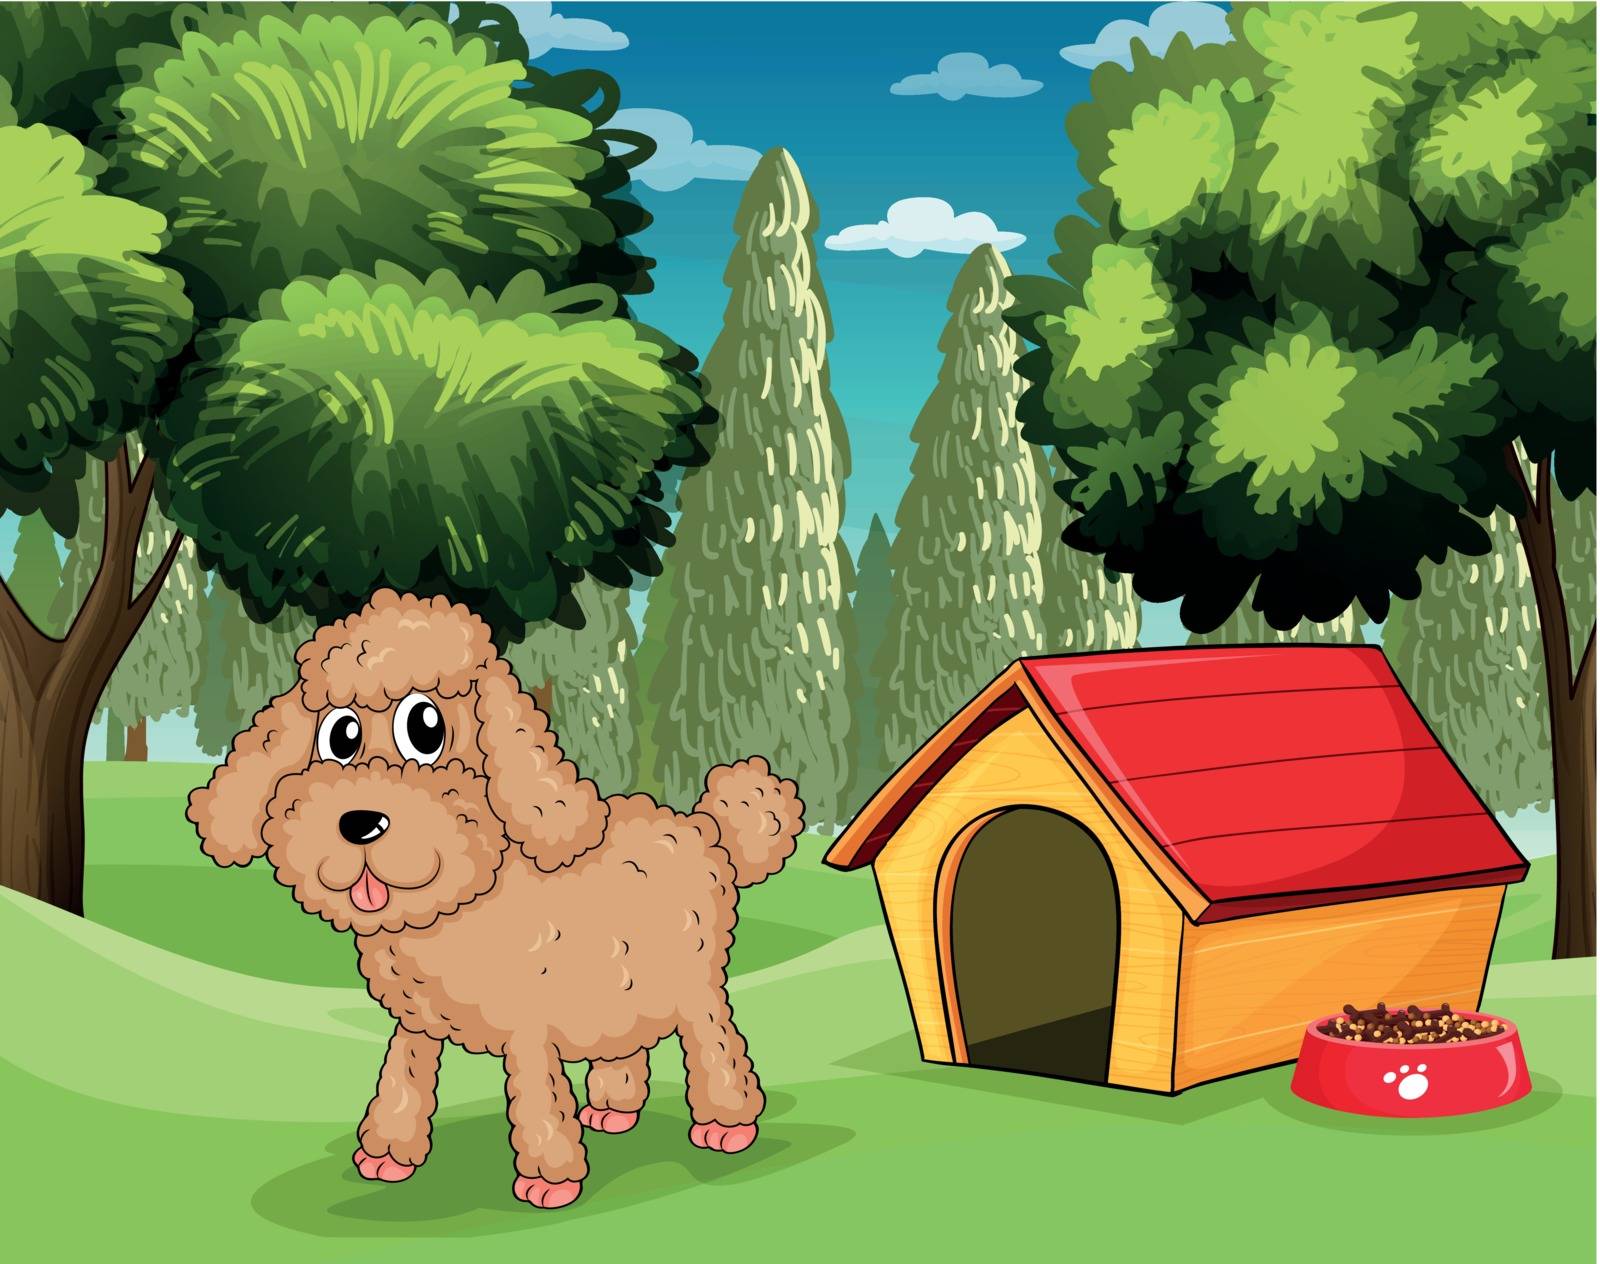 Illustration of a dog standing outside his dog house